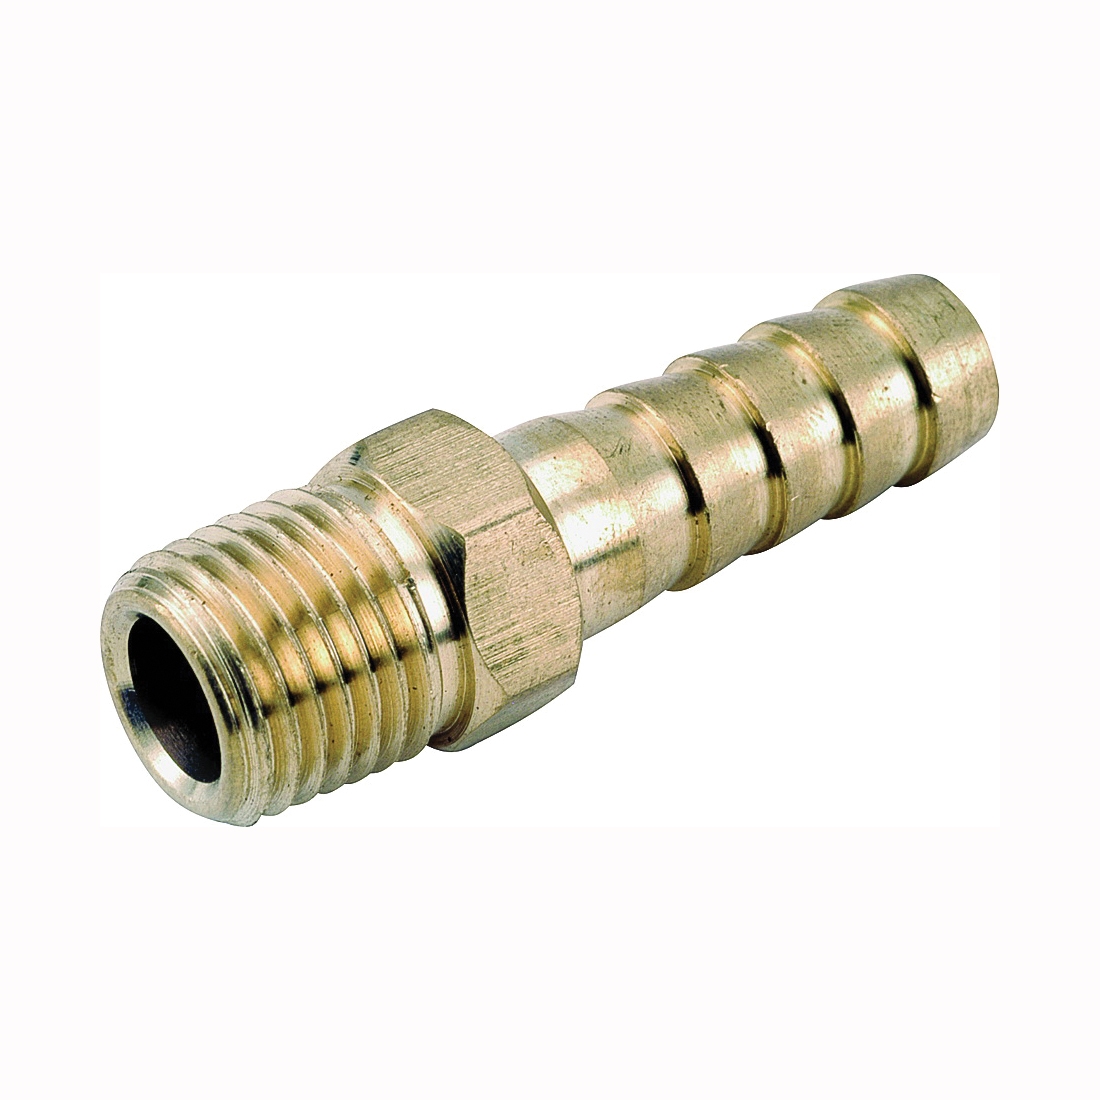 129 Series 757001-0606 Hose Adapter, 3/8 in, Barb, 3/8 in, MPT, Brass